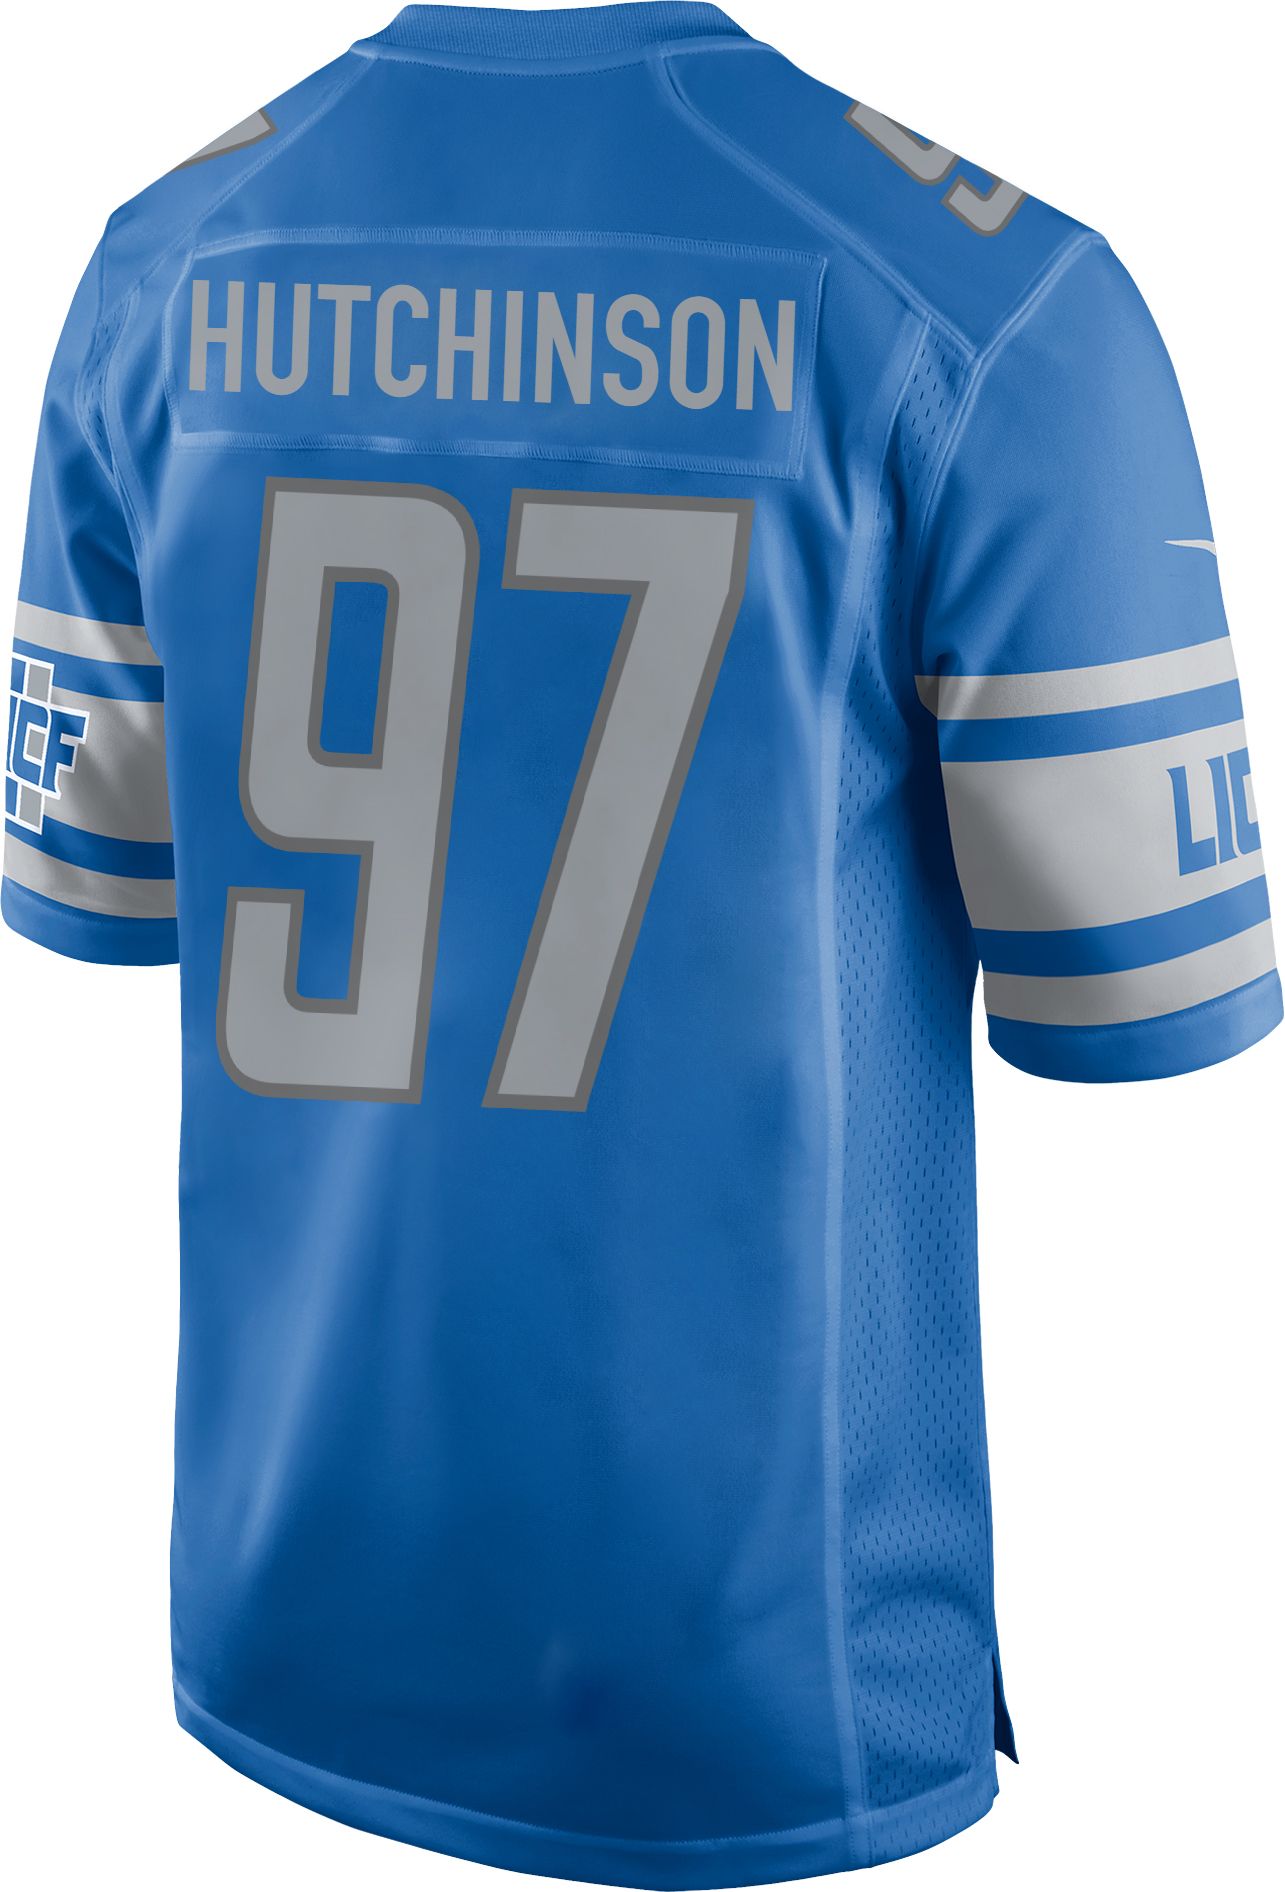 hutchinson lions jersey youth